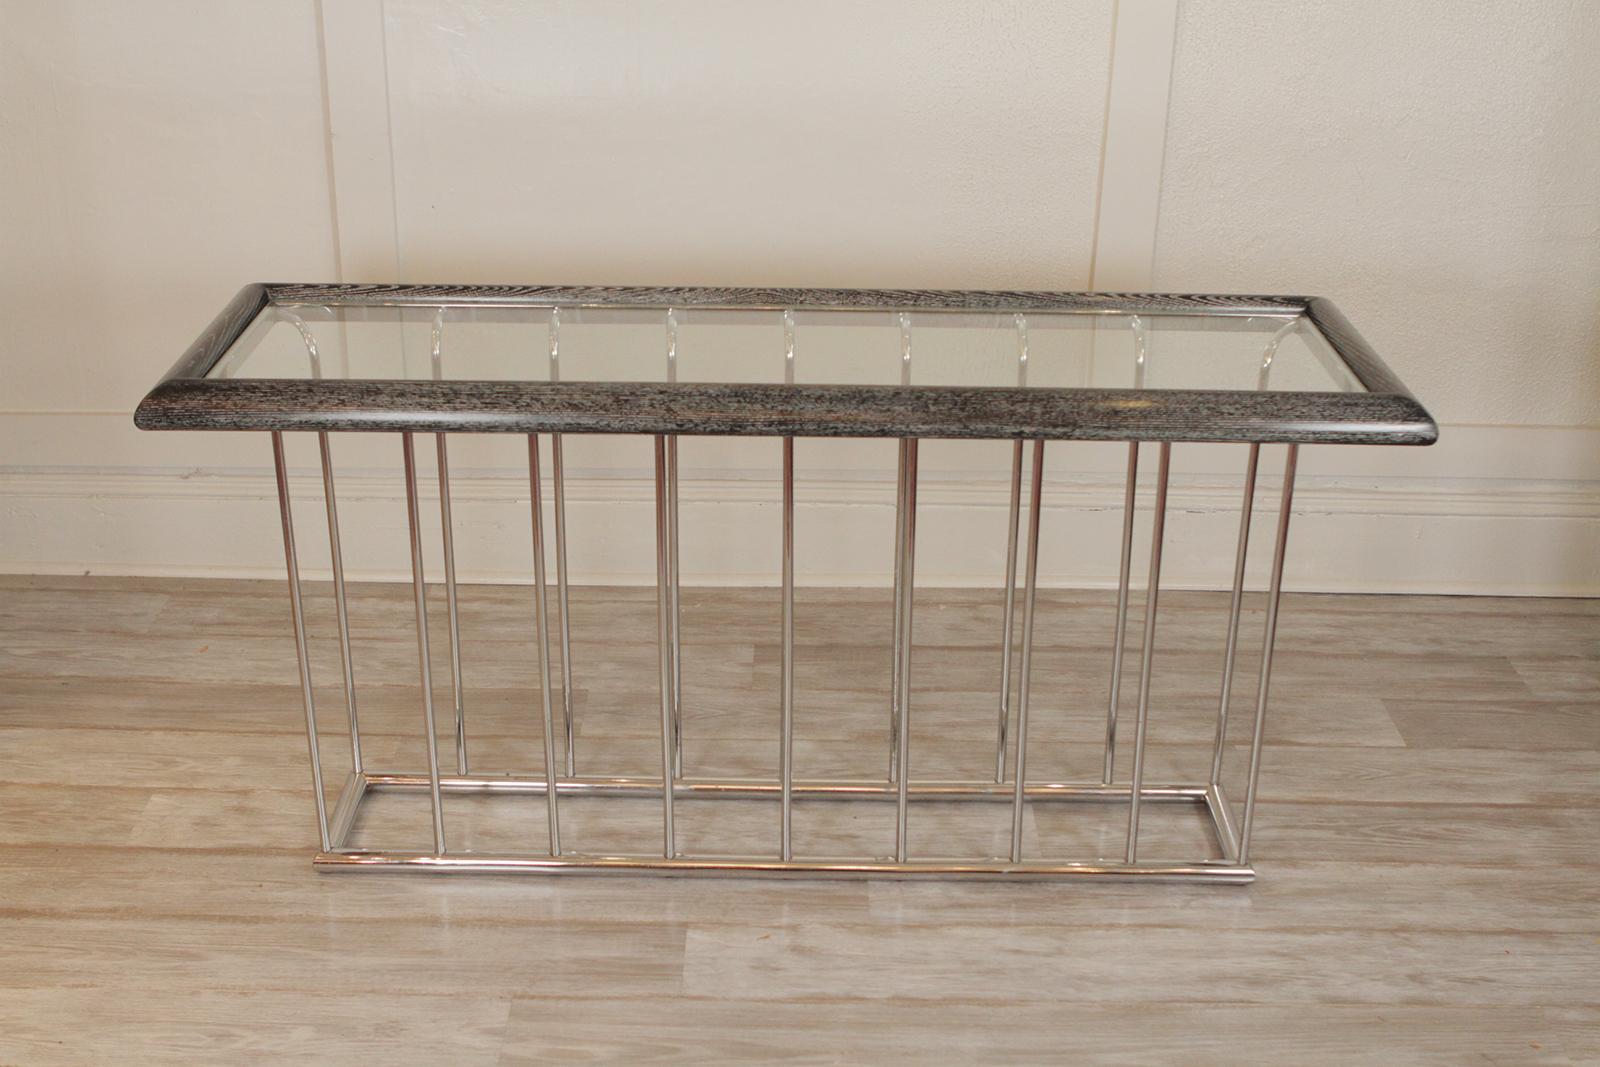 Modern cerused console or sofa table 
Dimensions: 57” W x 18” D x 27.5” H.